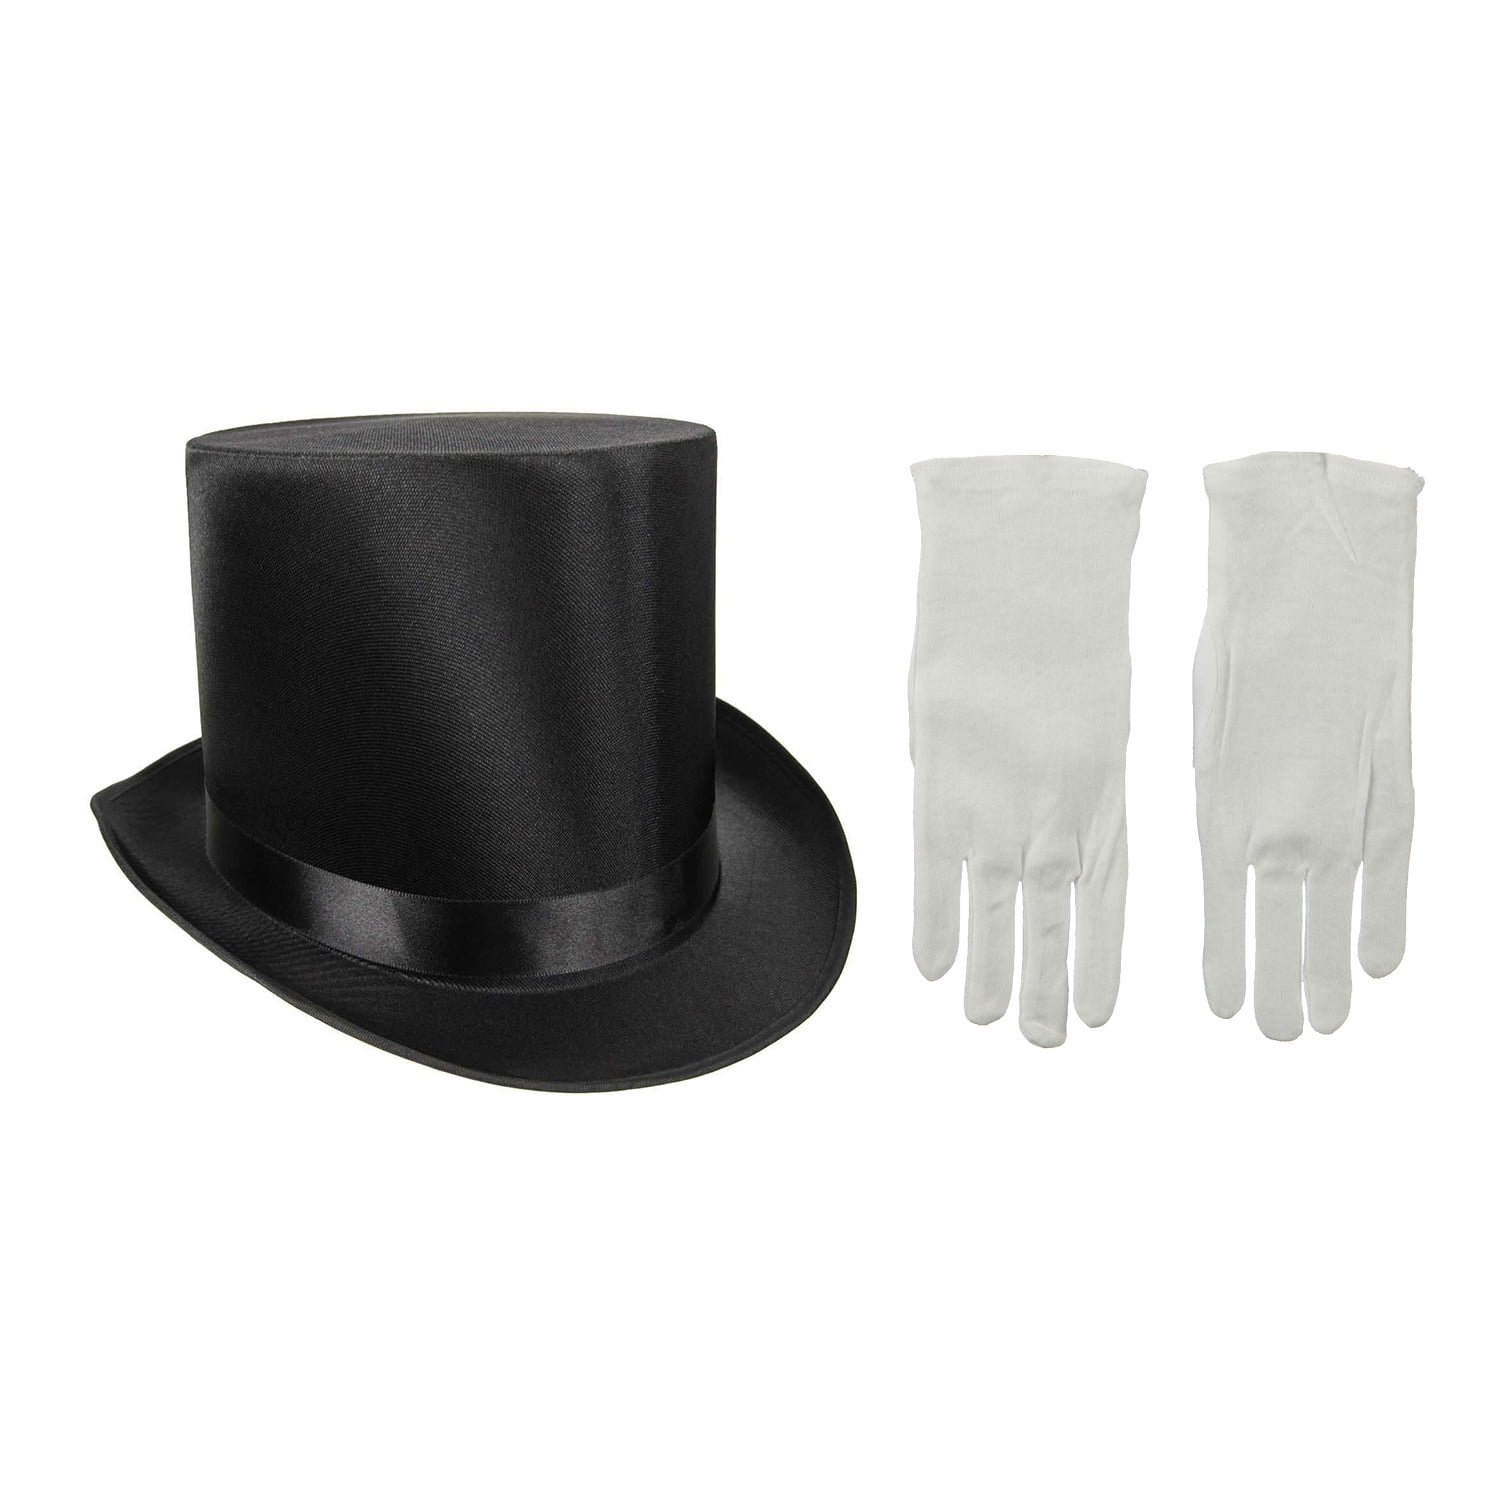 Tall Collapsible SNOWMAN BLACK MAGIC TOP HAT Cosplay Magician Costume Photo Prop 